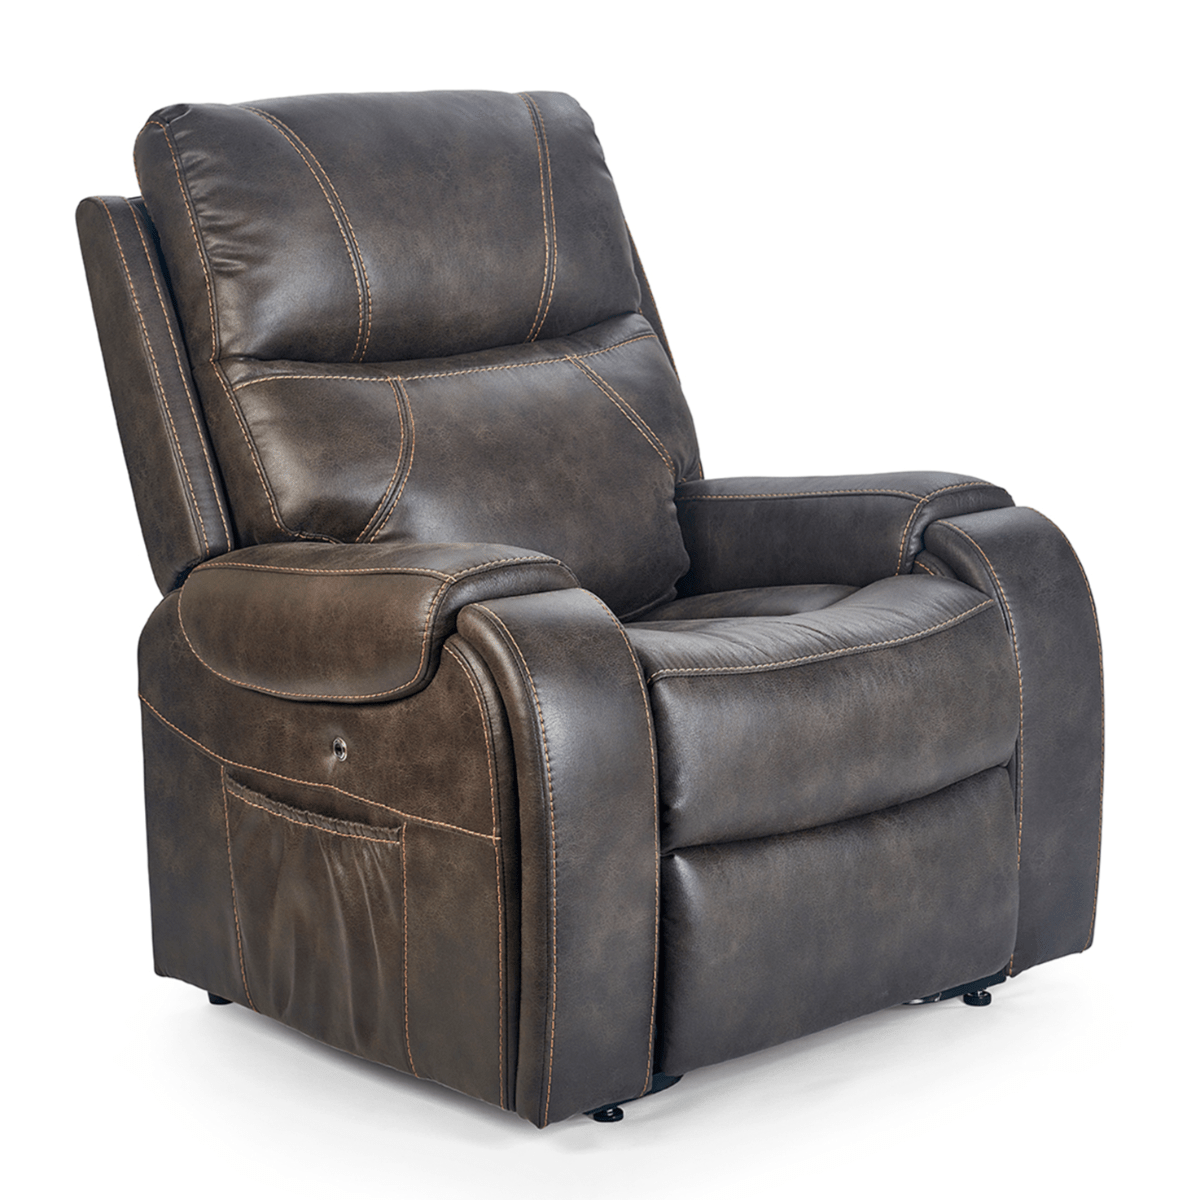 Sedona Lift Chair Power Recliner, angle seated view